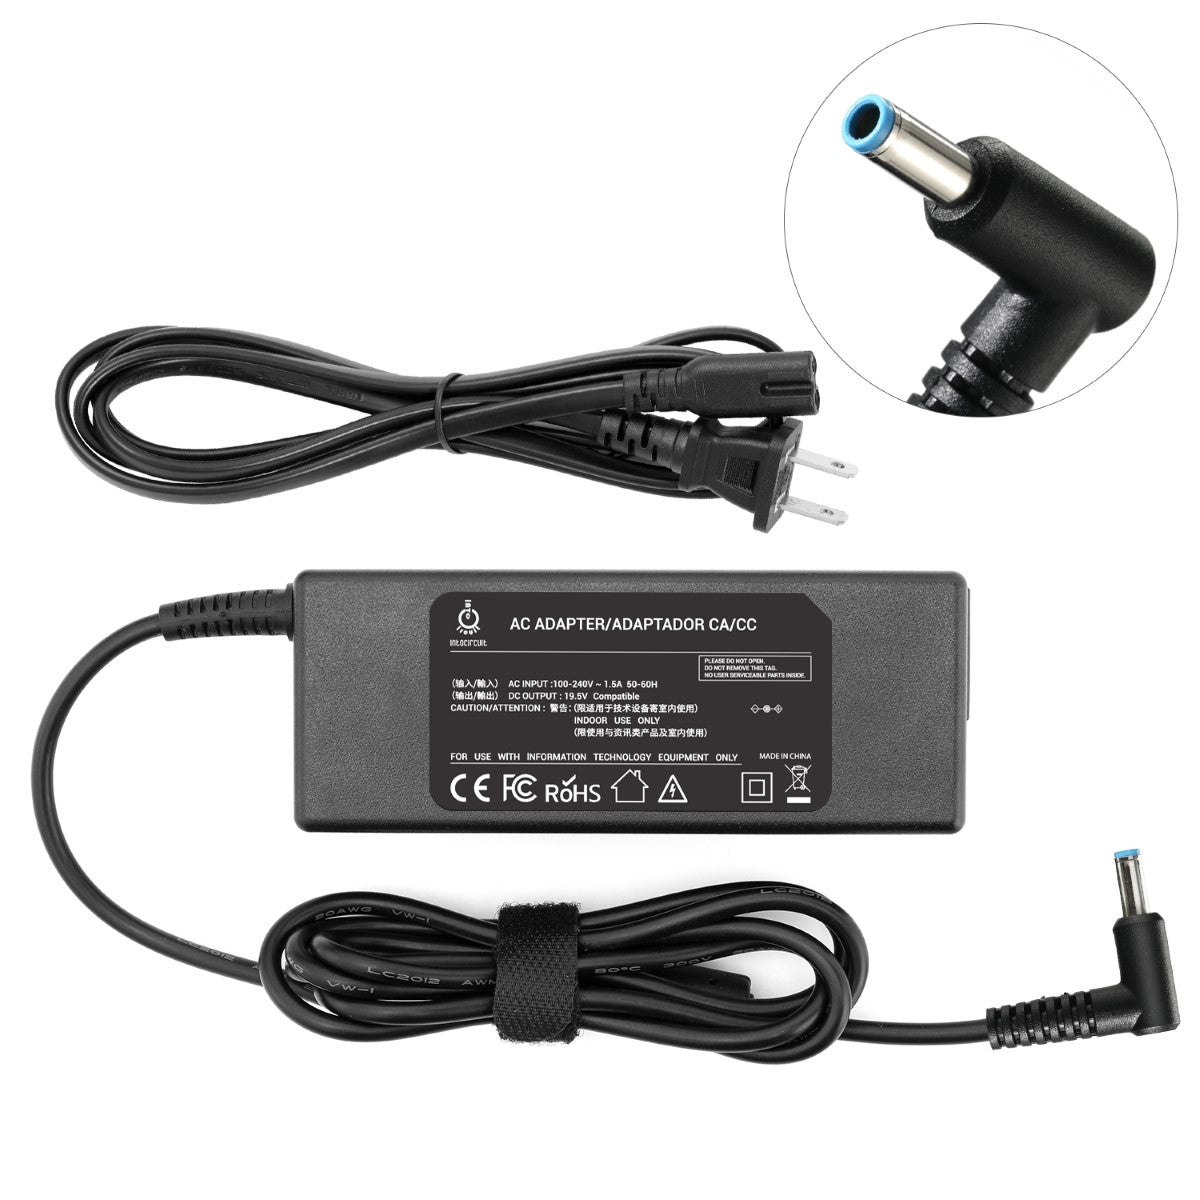 Charger for HP 210 G1 Notebook (NOT for Convertible Laptop x2 Version)